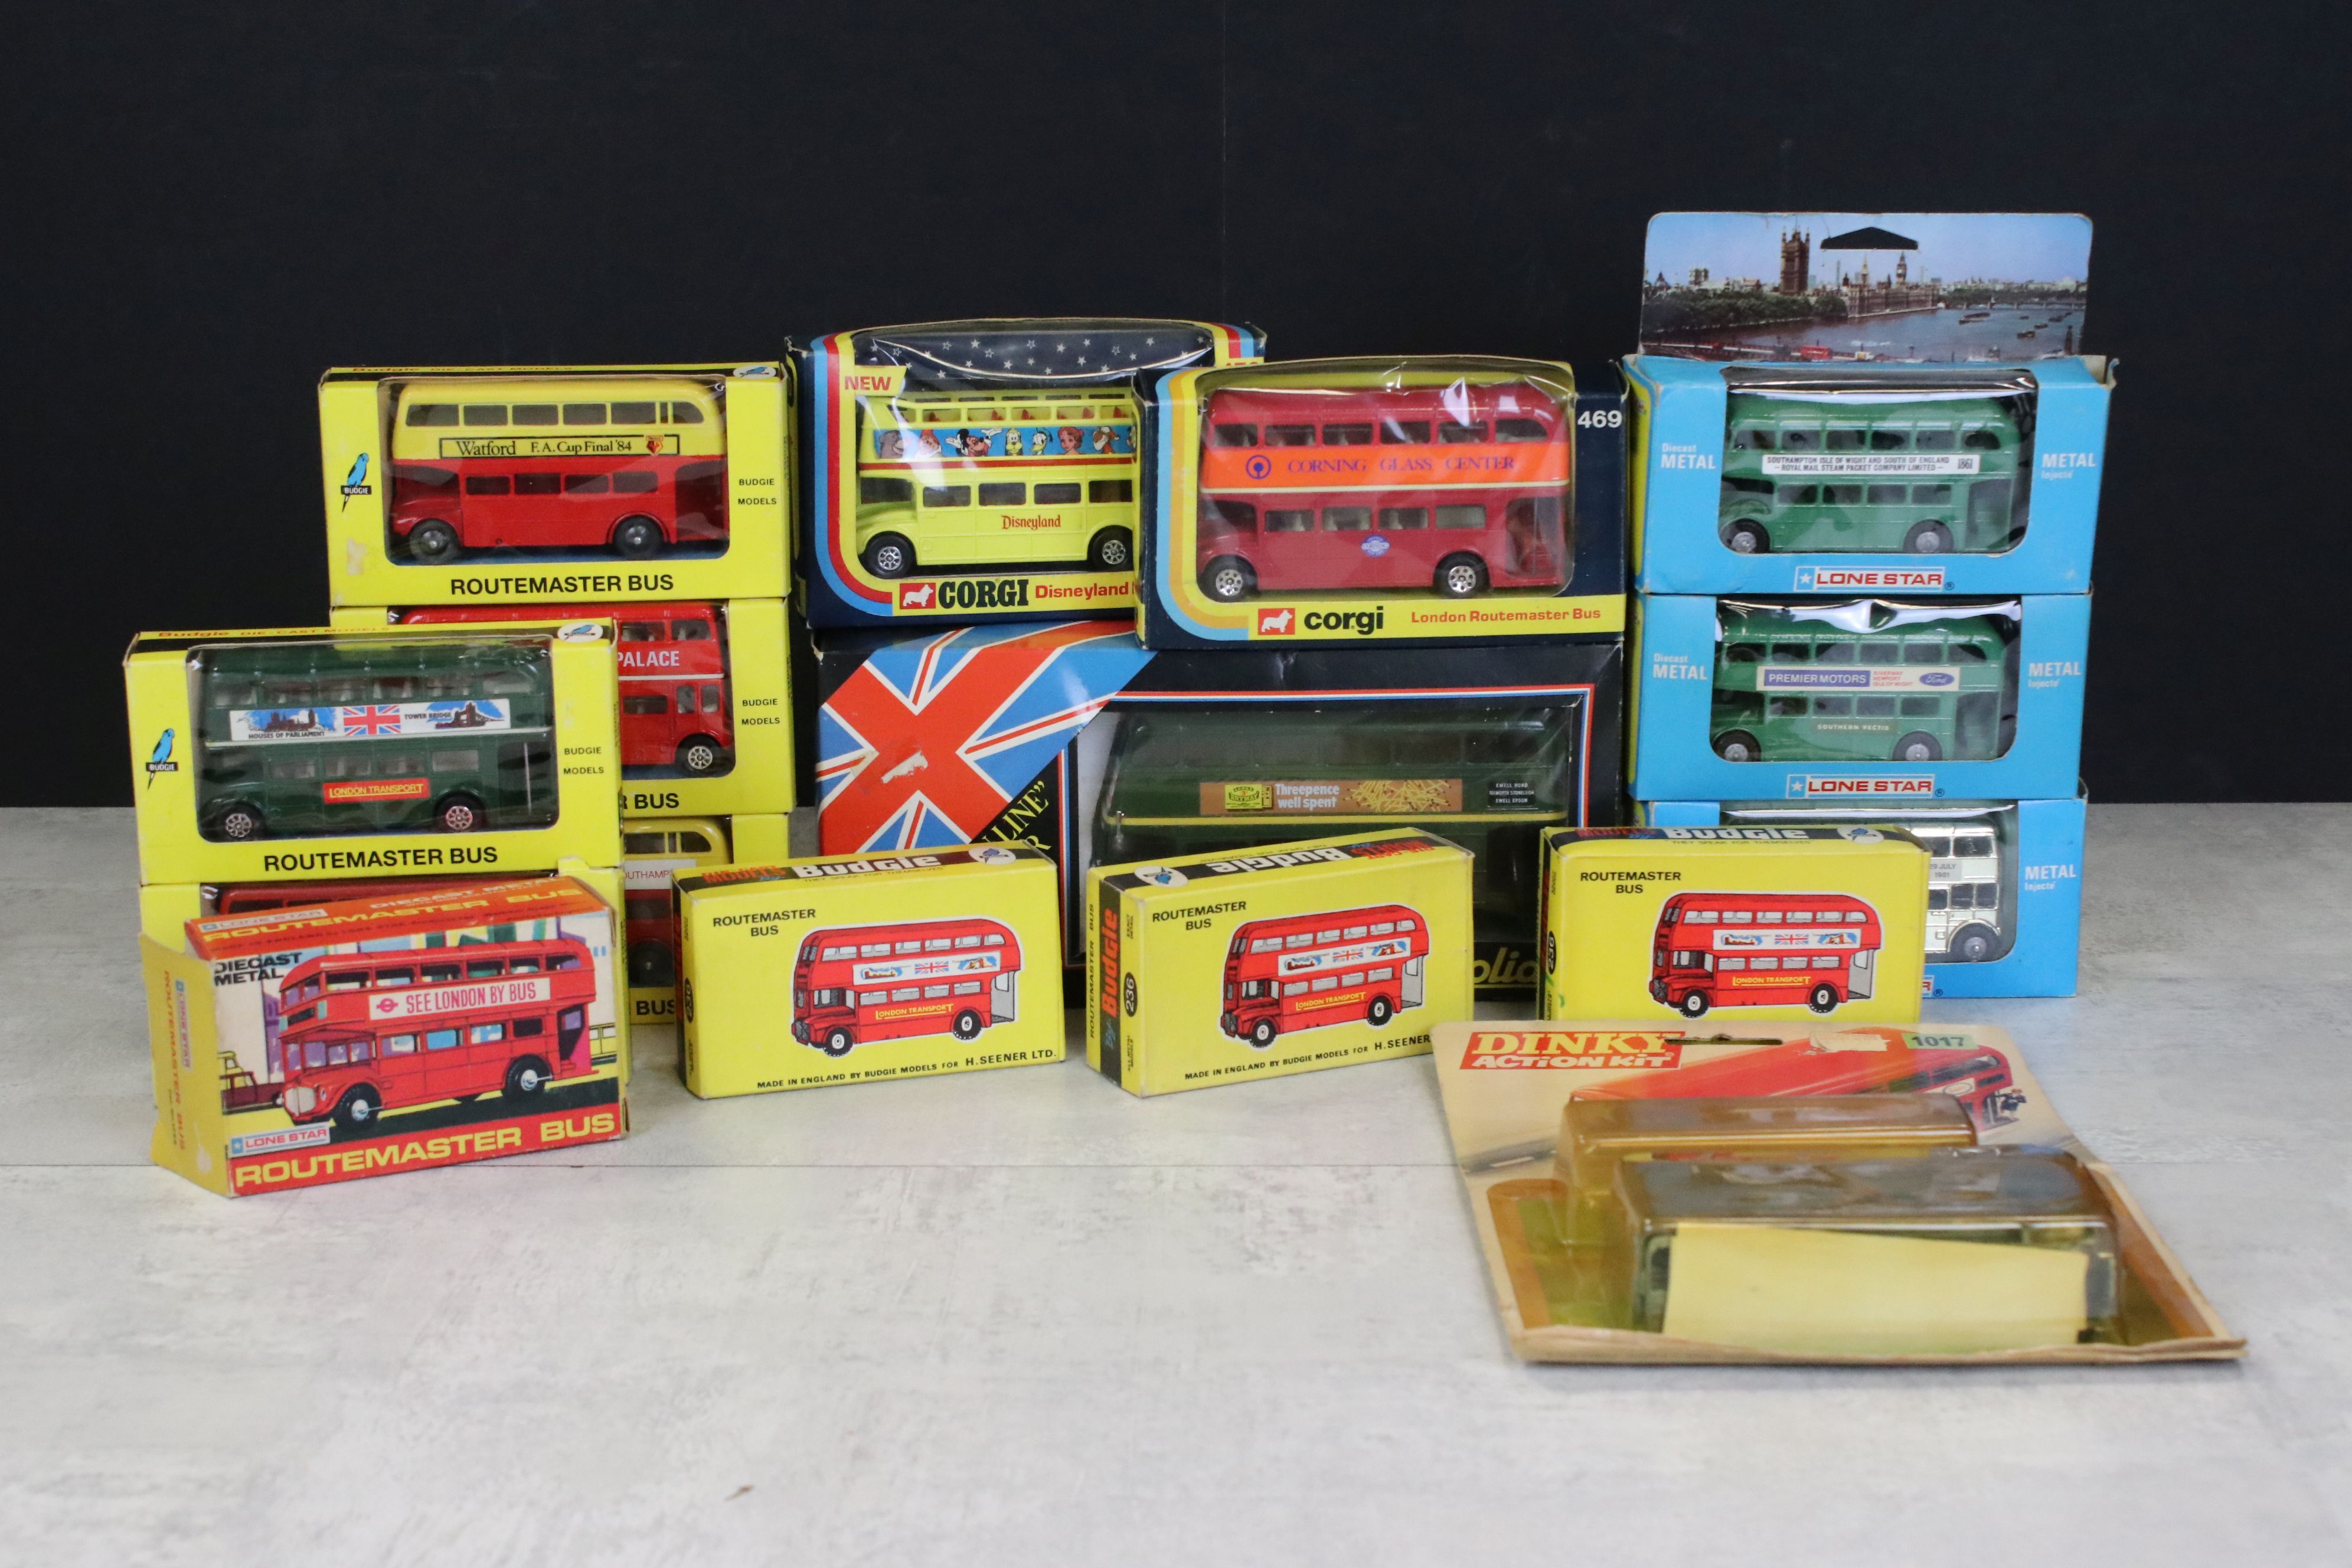 15 Boxed diecast models to include 8 x Budgie Routemaster Bus, 4 x Lone Star buses, 2 x Corgi (469